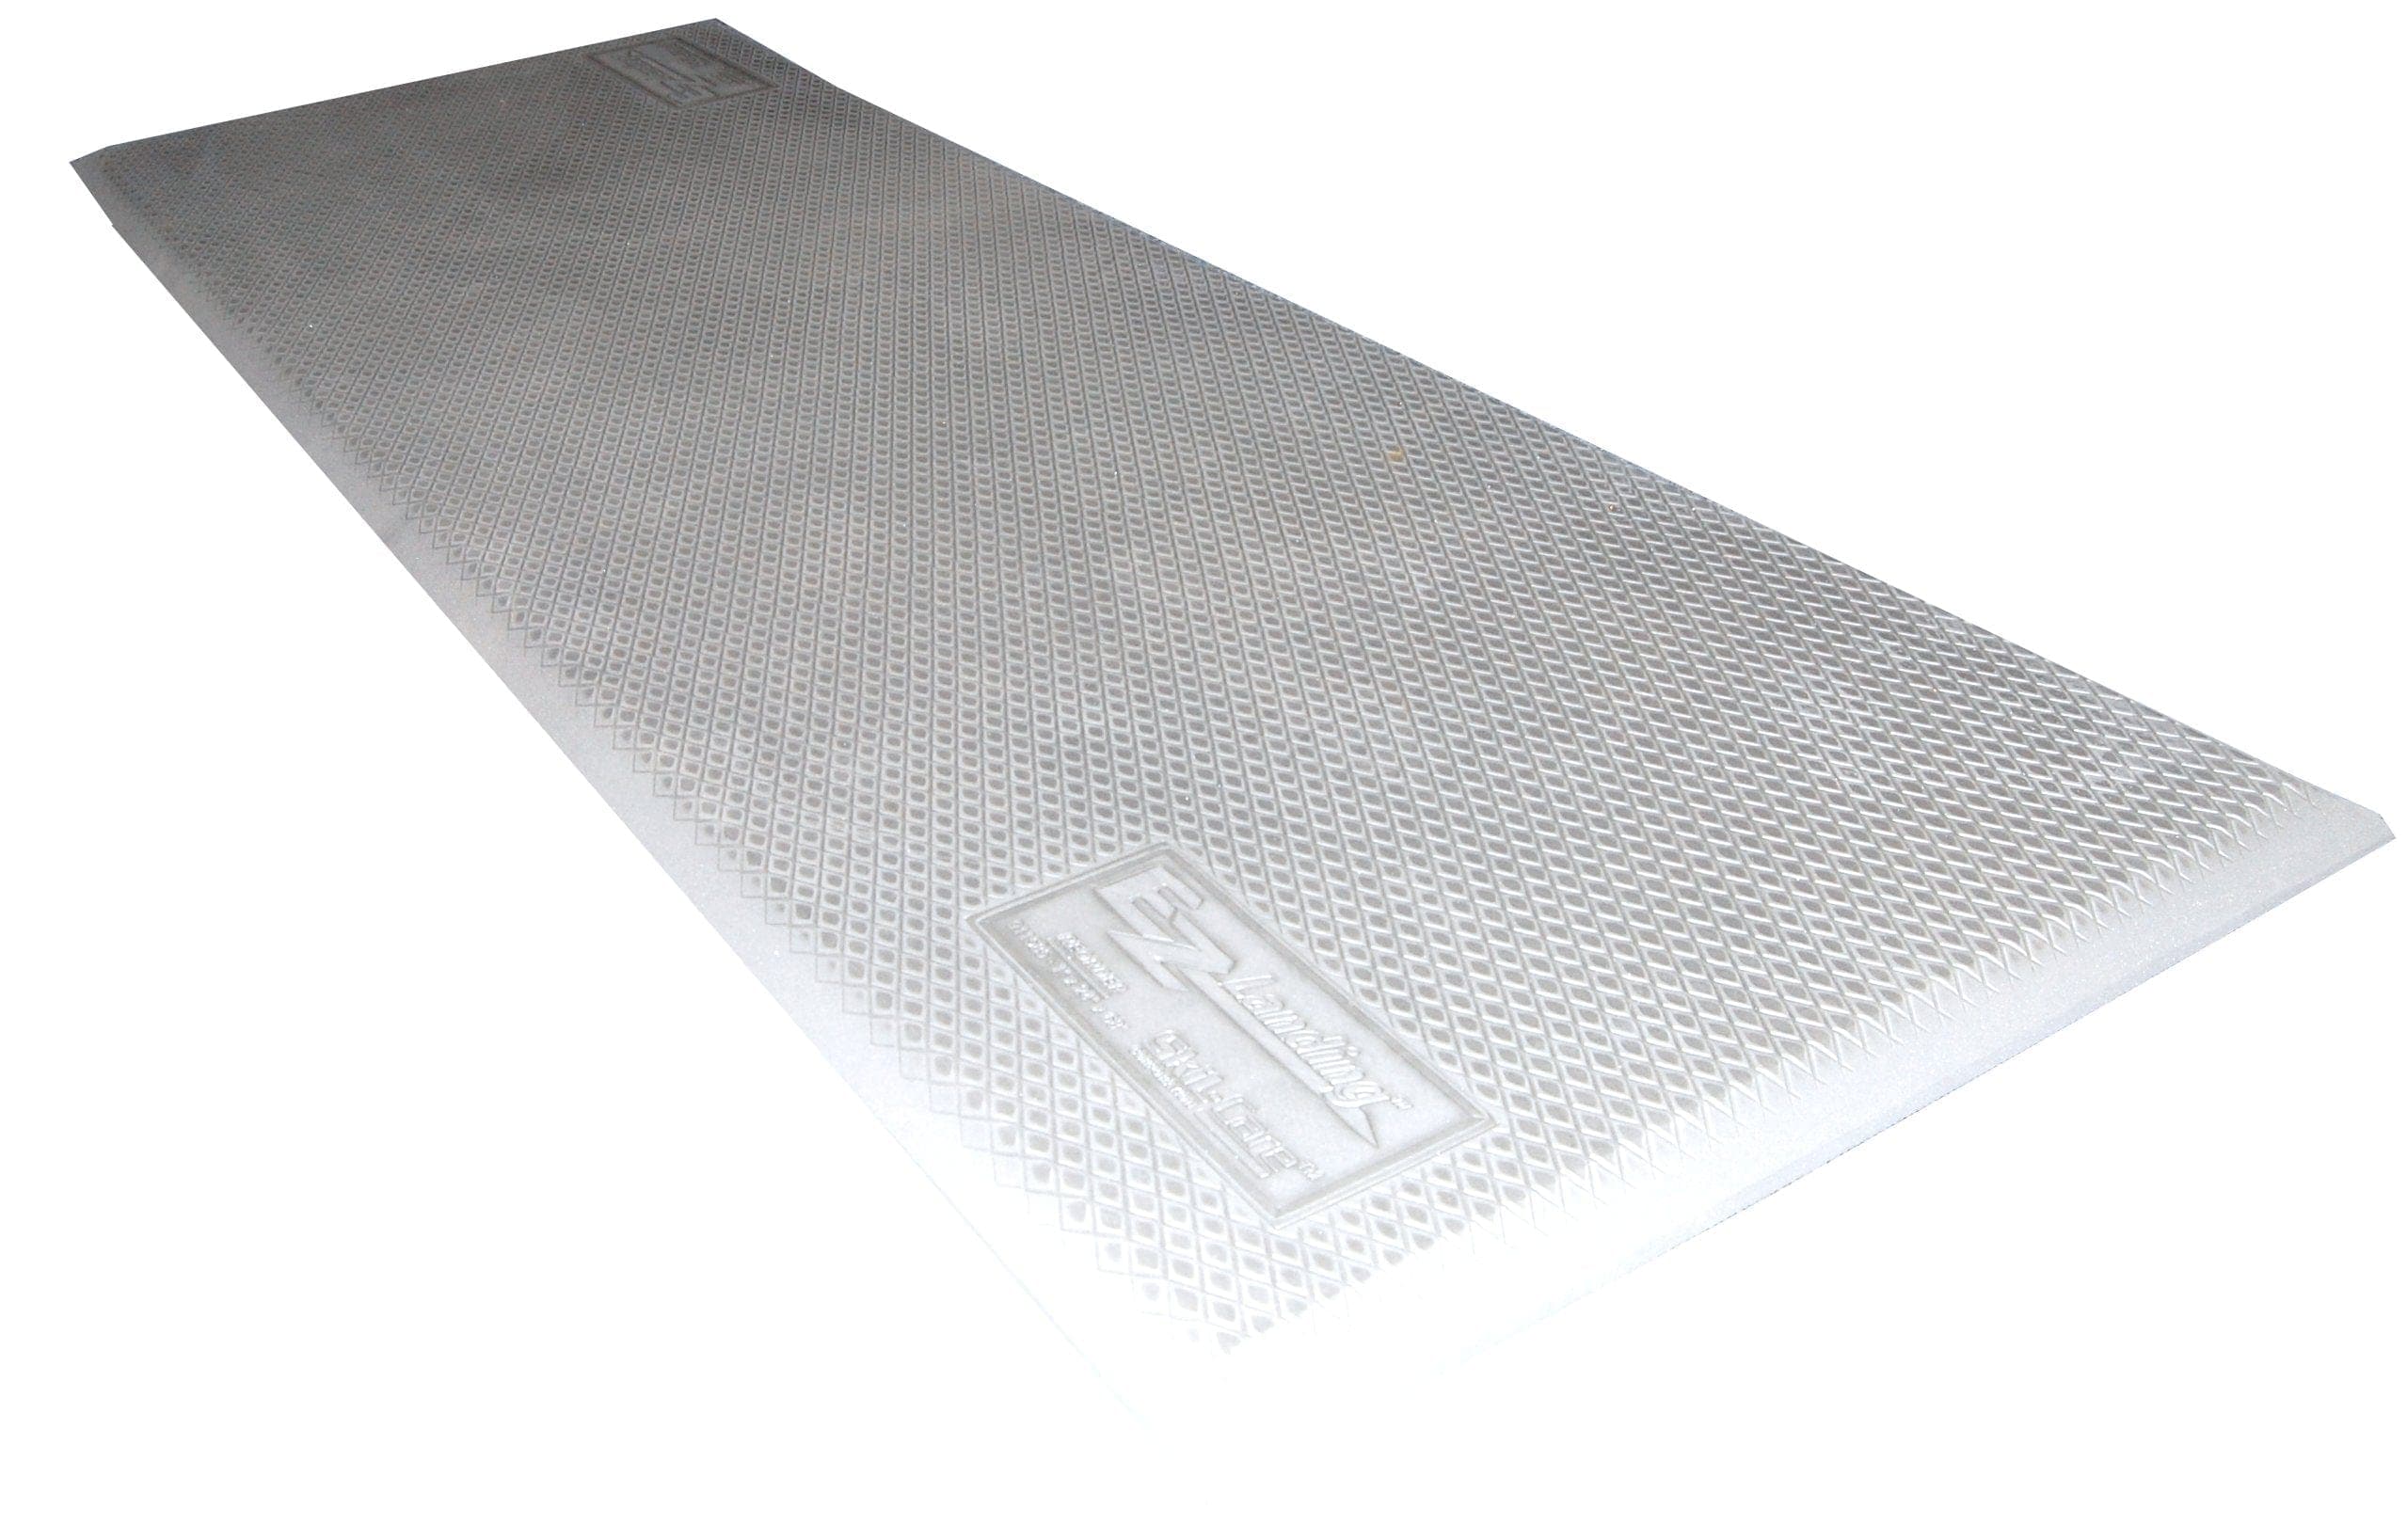 SkilCare Safety 24" SkilCare E-Z Landing 24" Mat with Beveled Low Profile Edges